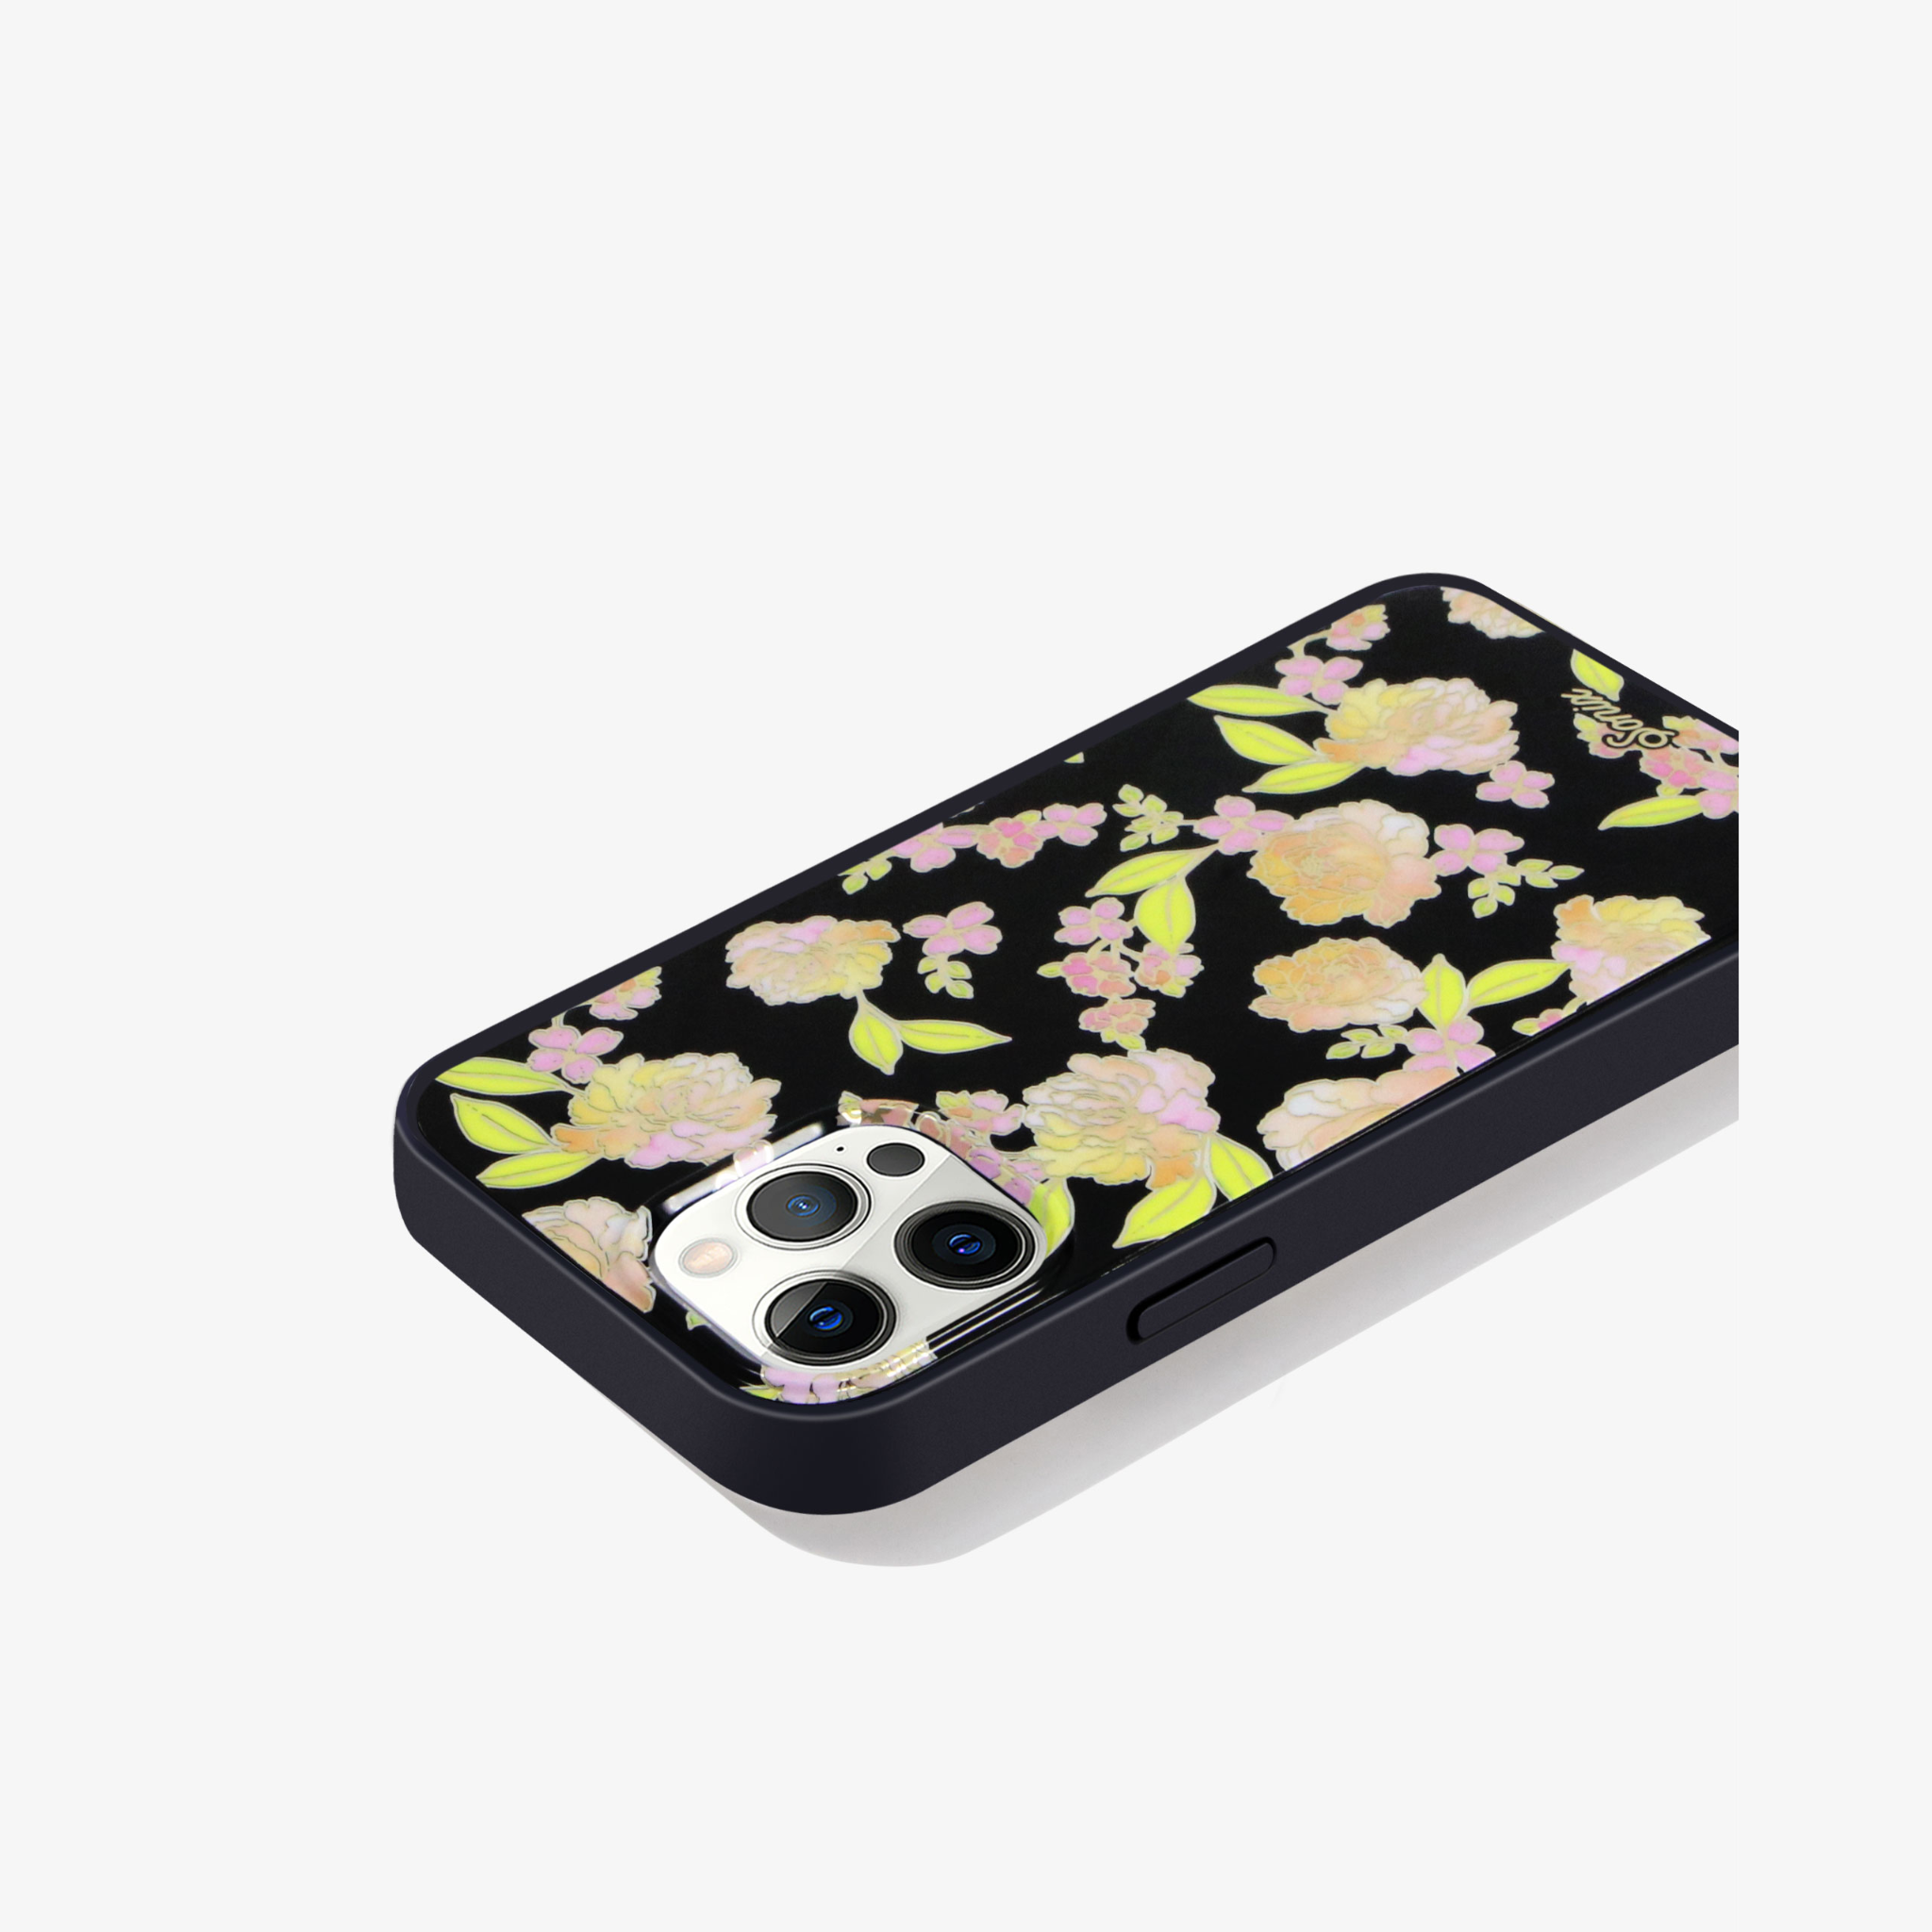 Black, iPhone case features a black base, gold foil details, and dainty flowers on an iphhone 12 pro side view